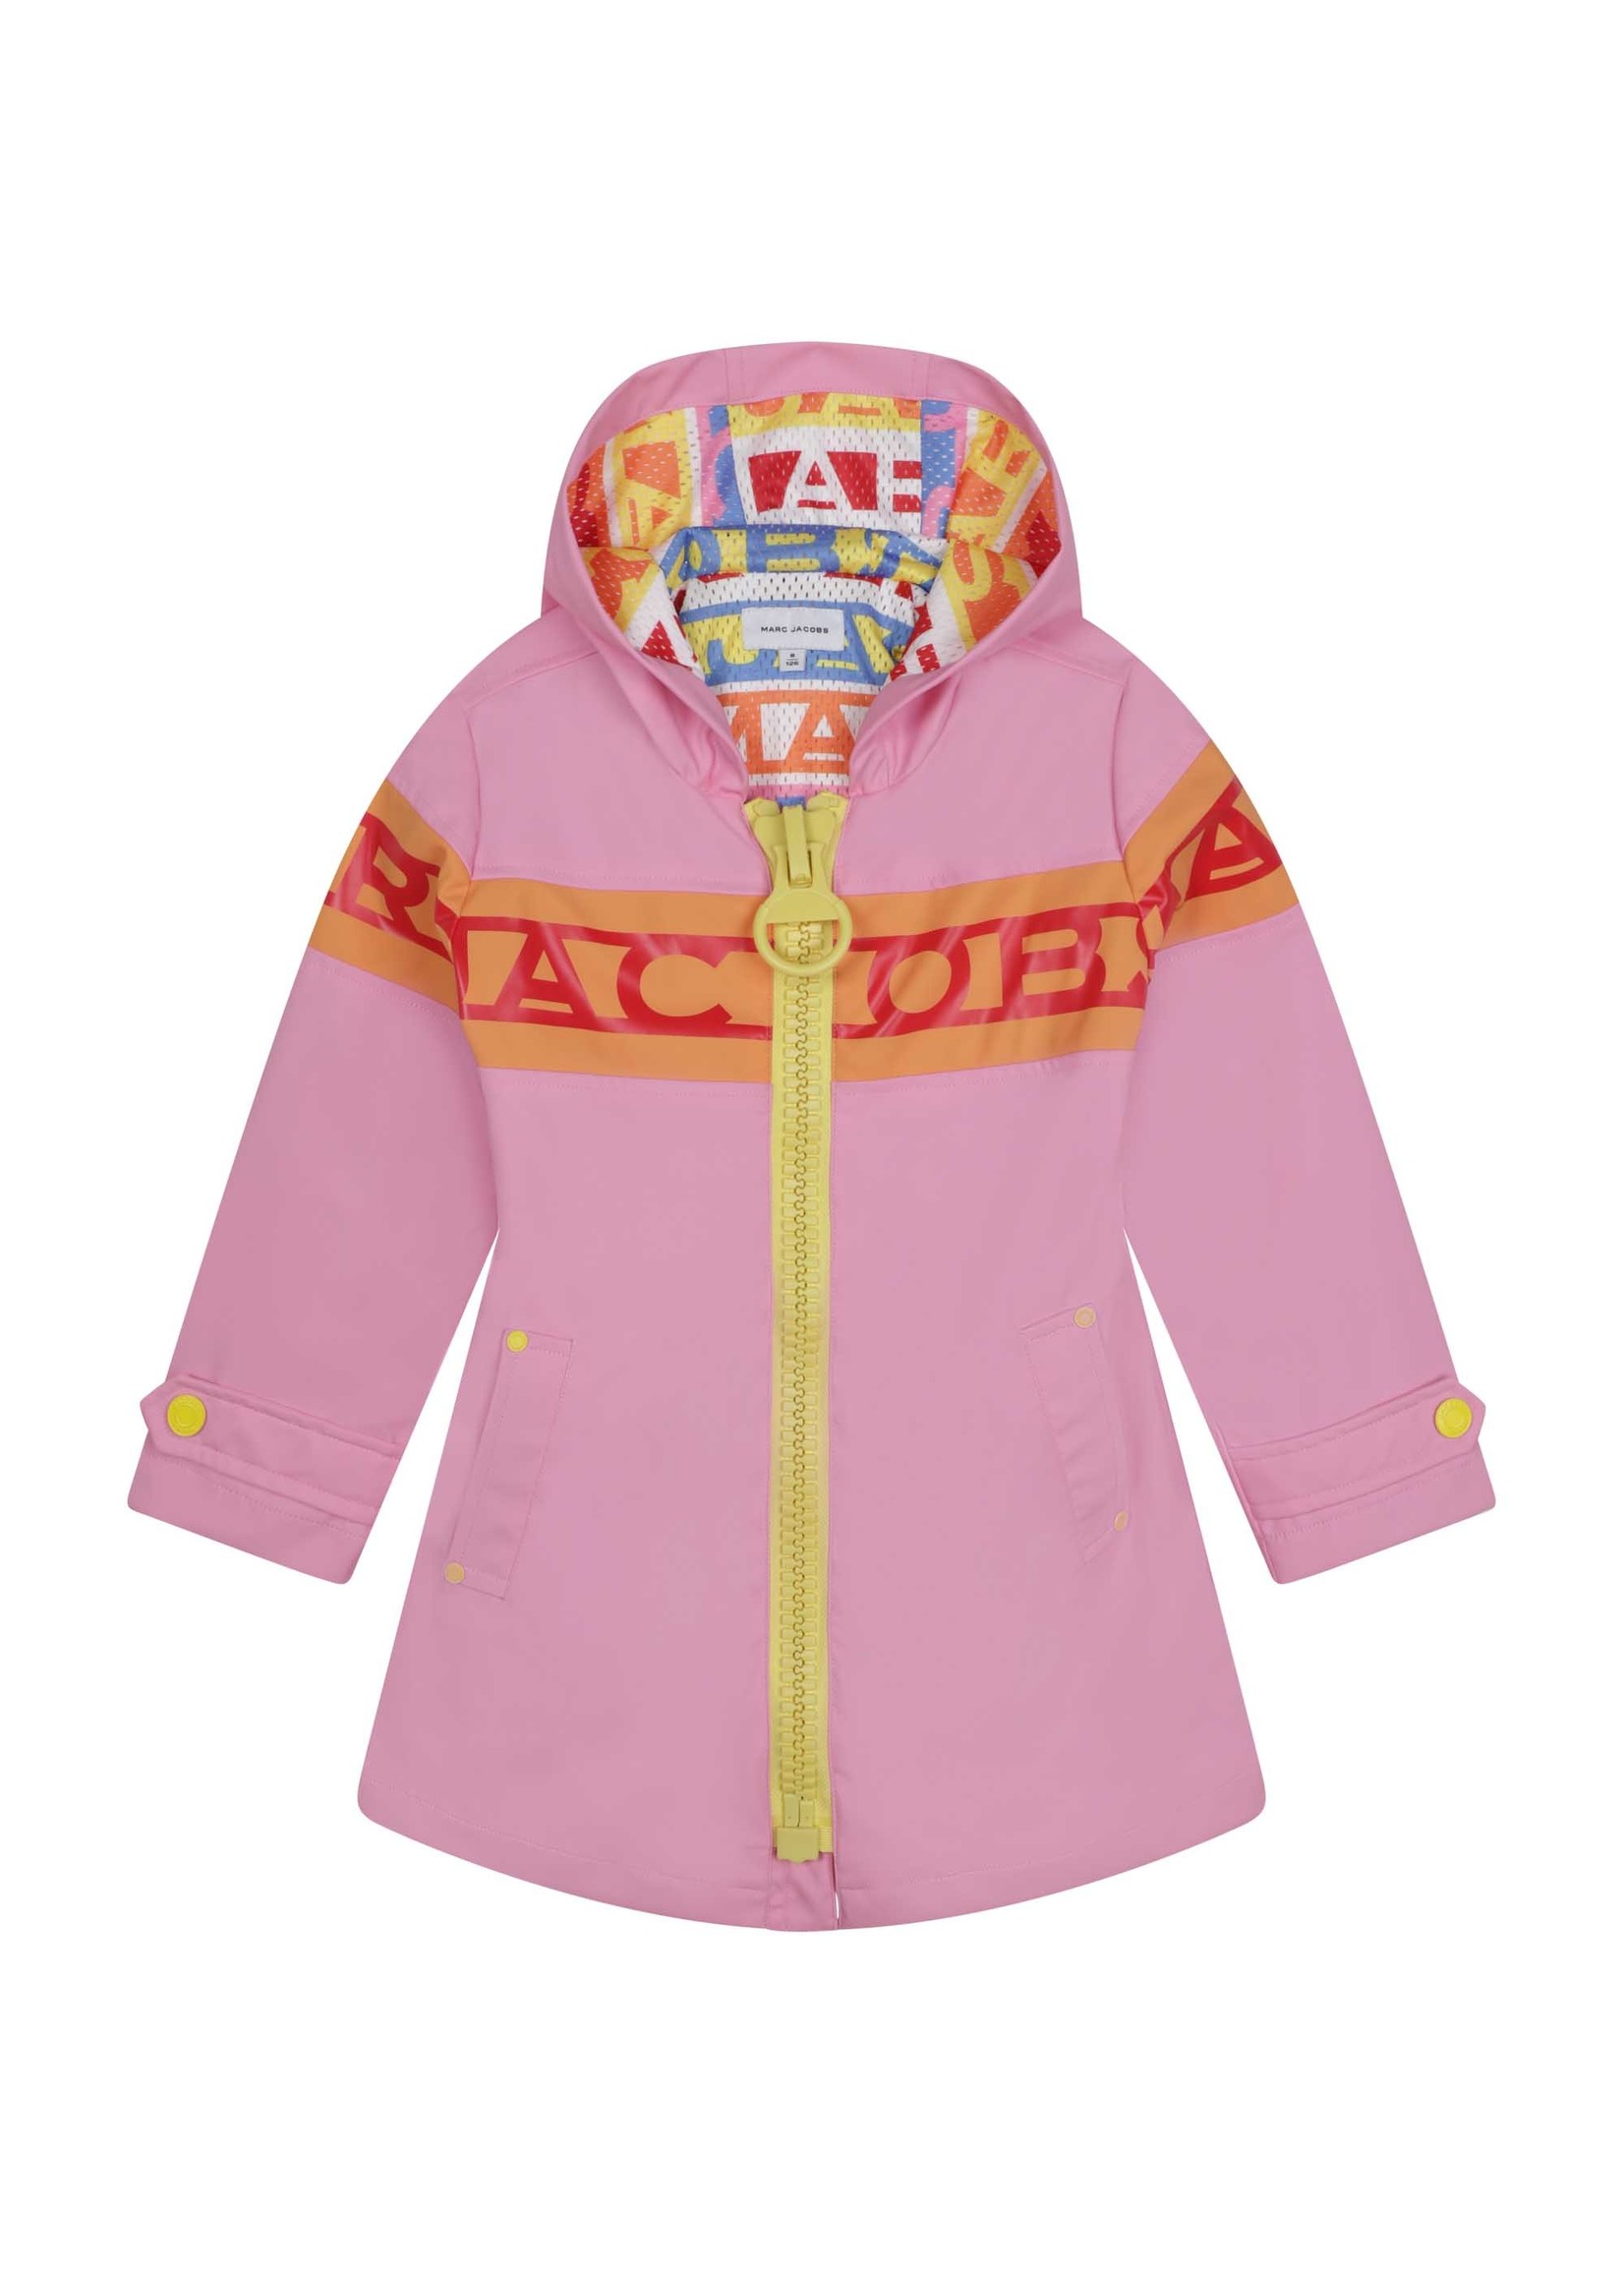 Marc Jacobs Marc Jacobs Girl jacket rose candy - W16151